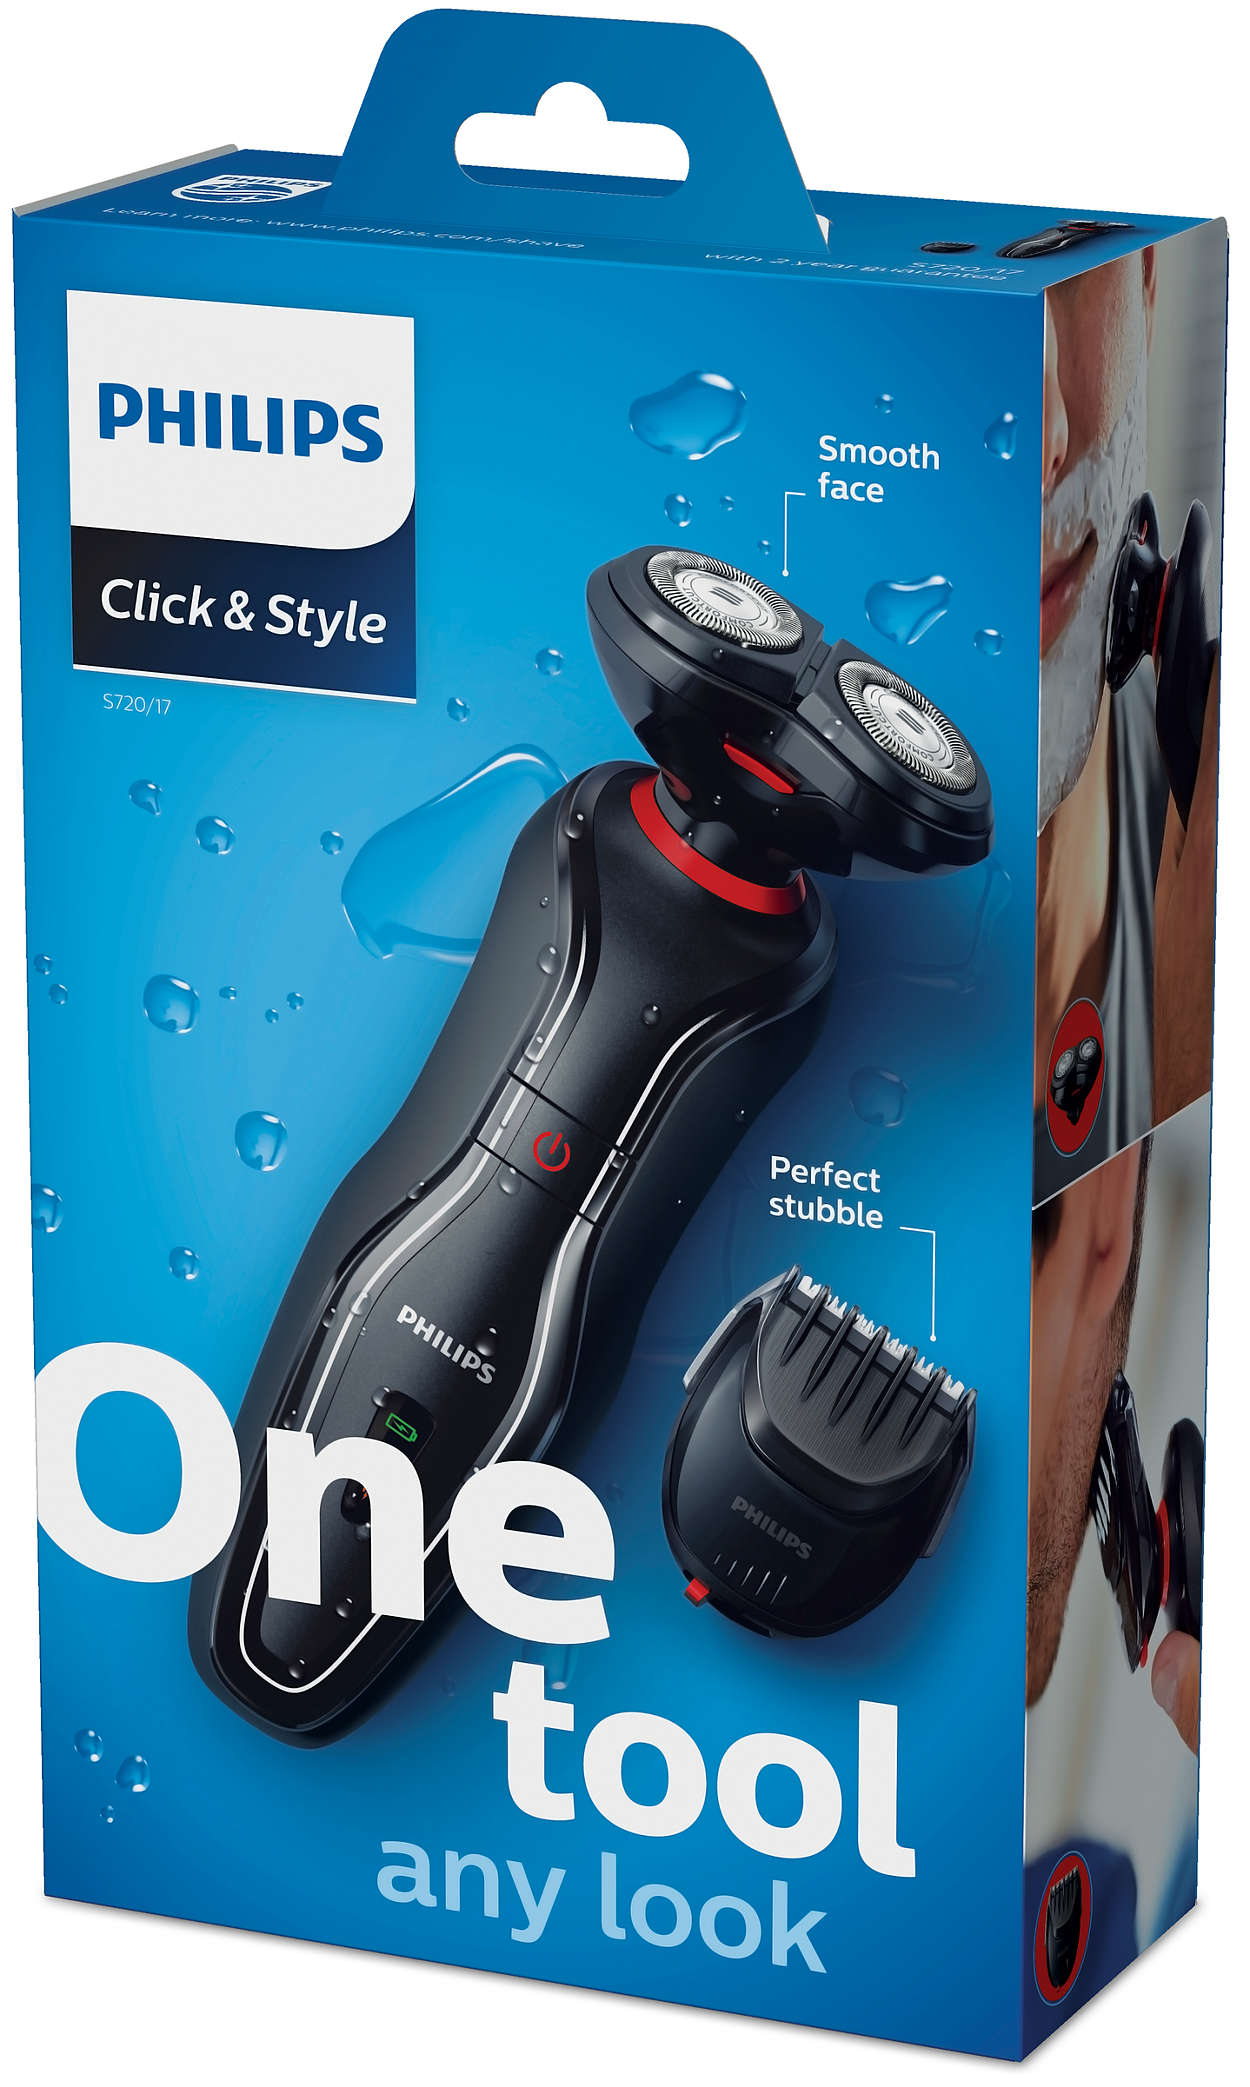 Image result for Philips Click And Style Shaver And Beard Trimmer (S720/17)